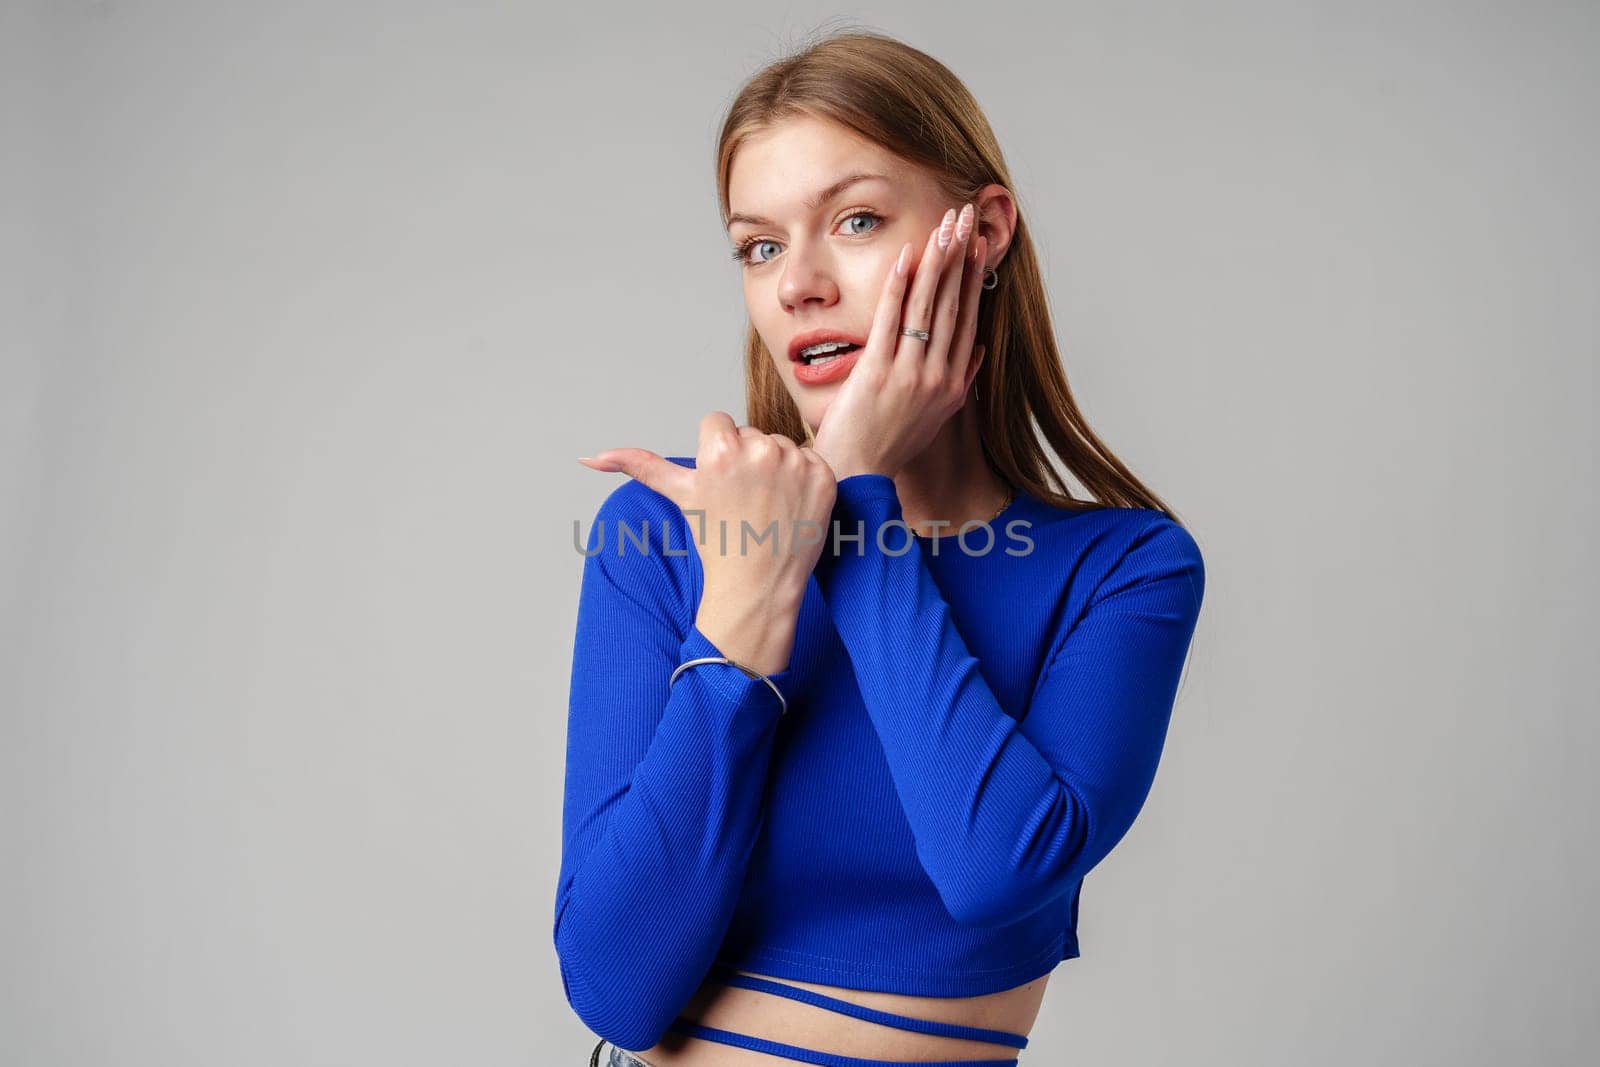 Woman in Blue Top Pointing With Hand Against Neutral Background in studio